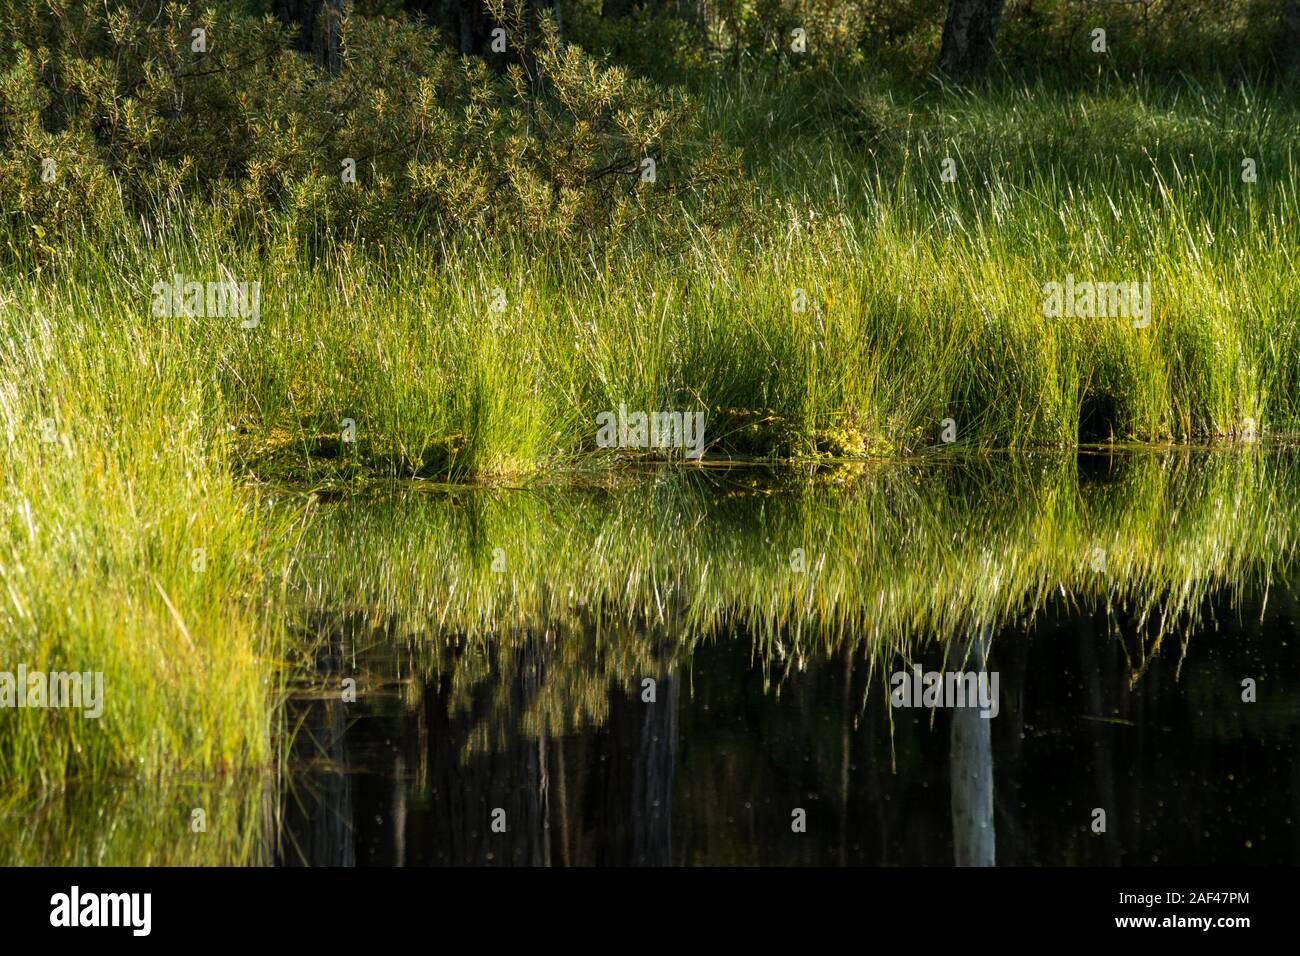 detail of aquatic plants like carex limosa on a shore of dystrophic lake Stock Photo